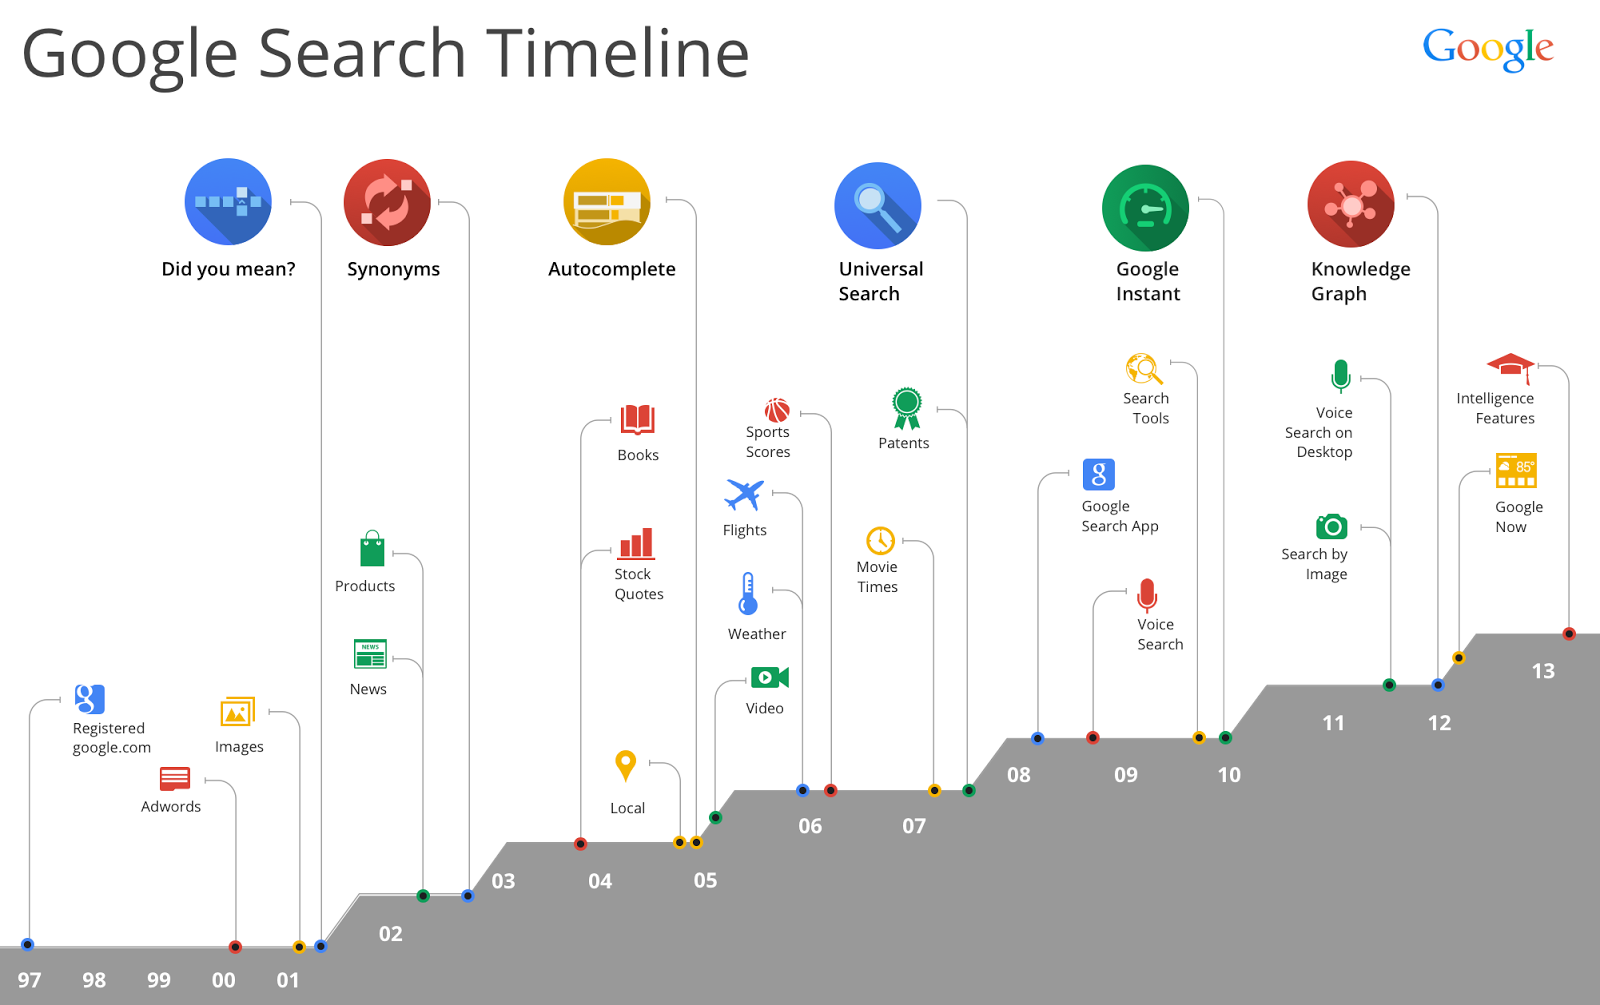 Google-Search-History-Timeline-from-1997-2013-infographic